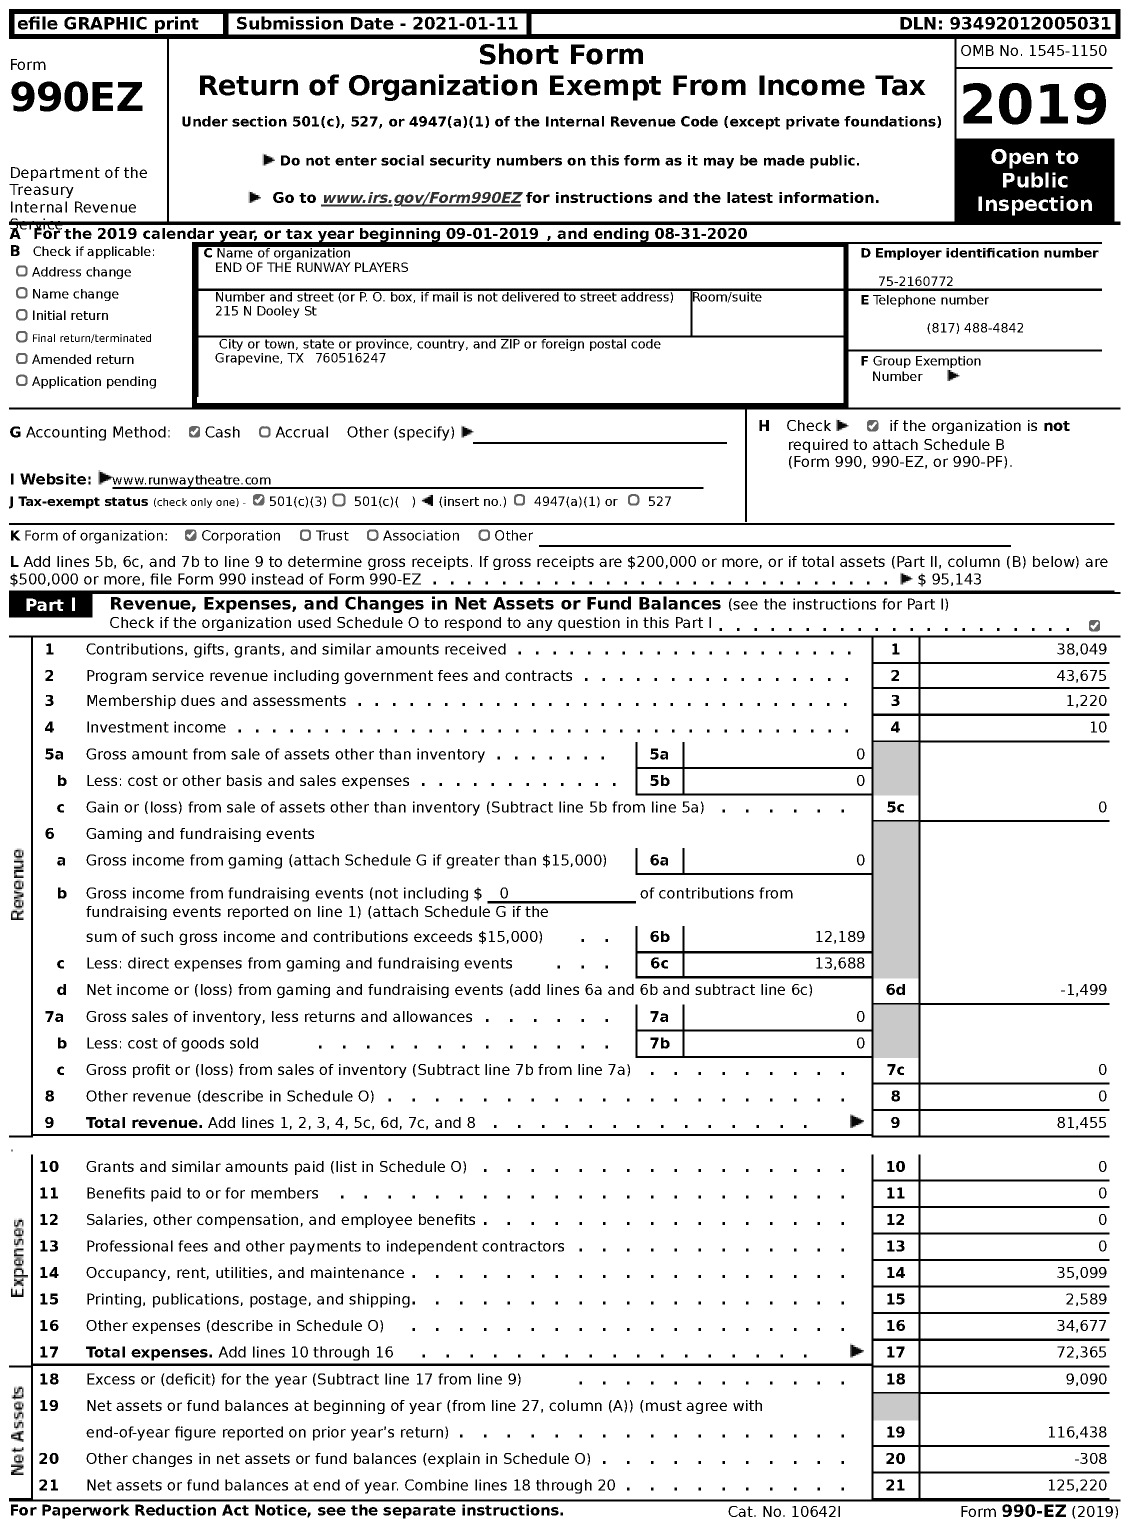 Image of first page of 2019 Form 990EZ for End of the Runway Players